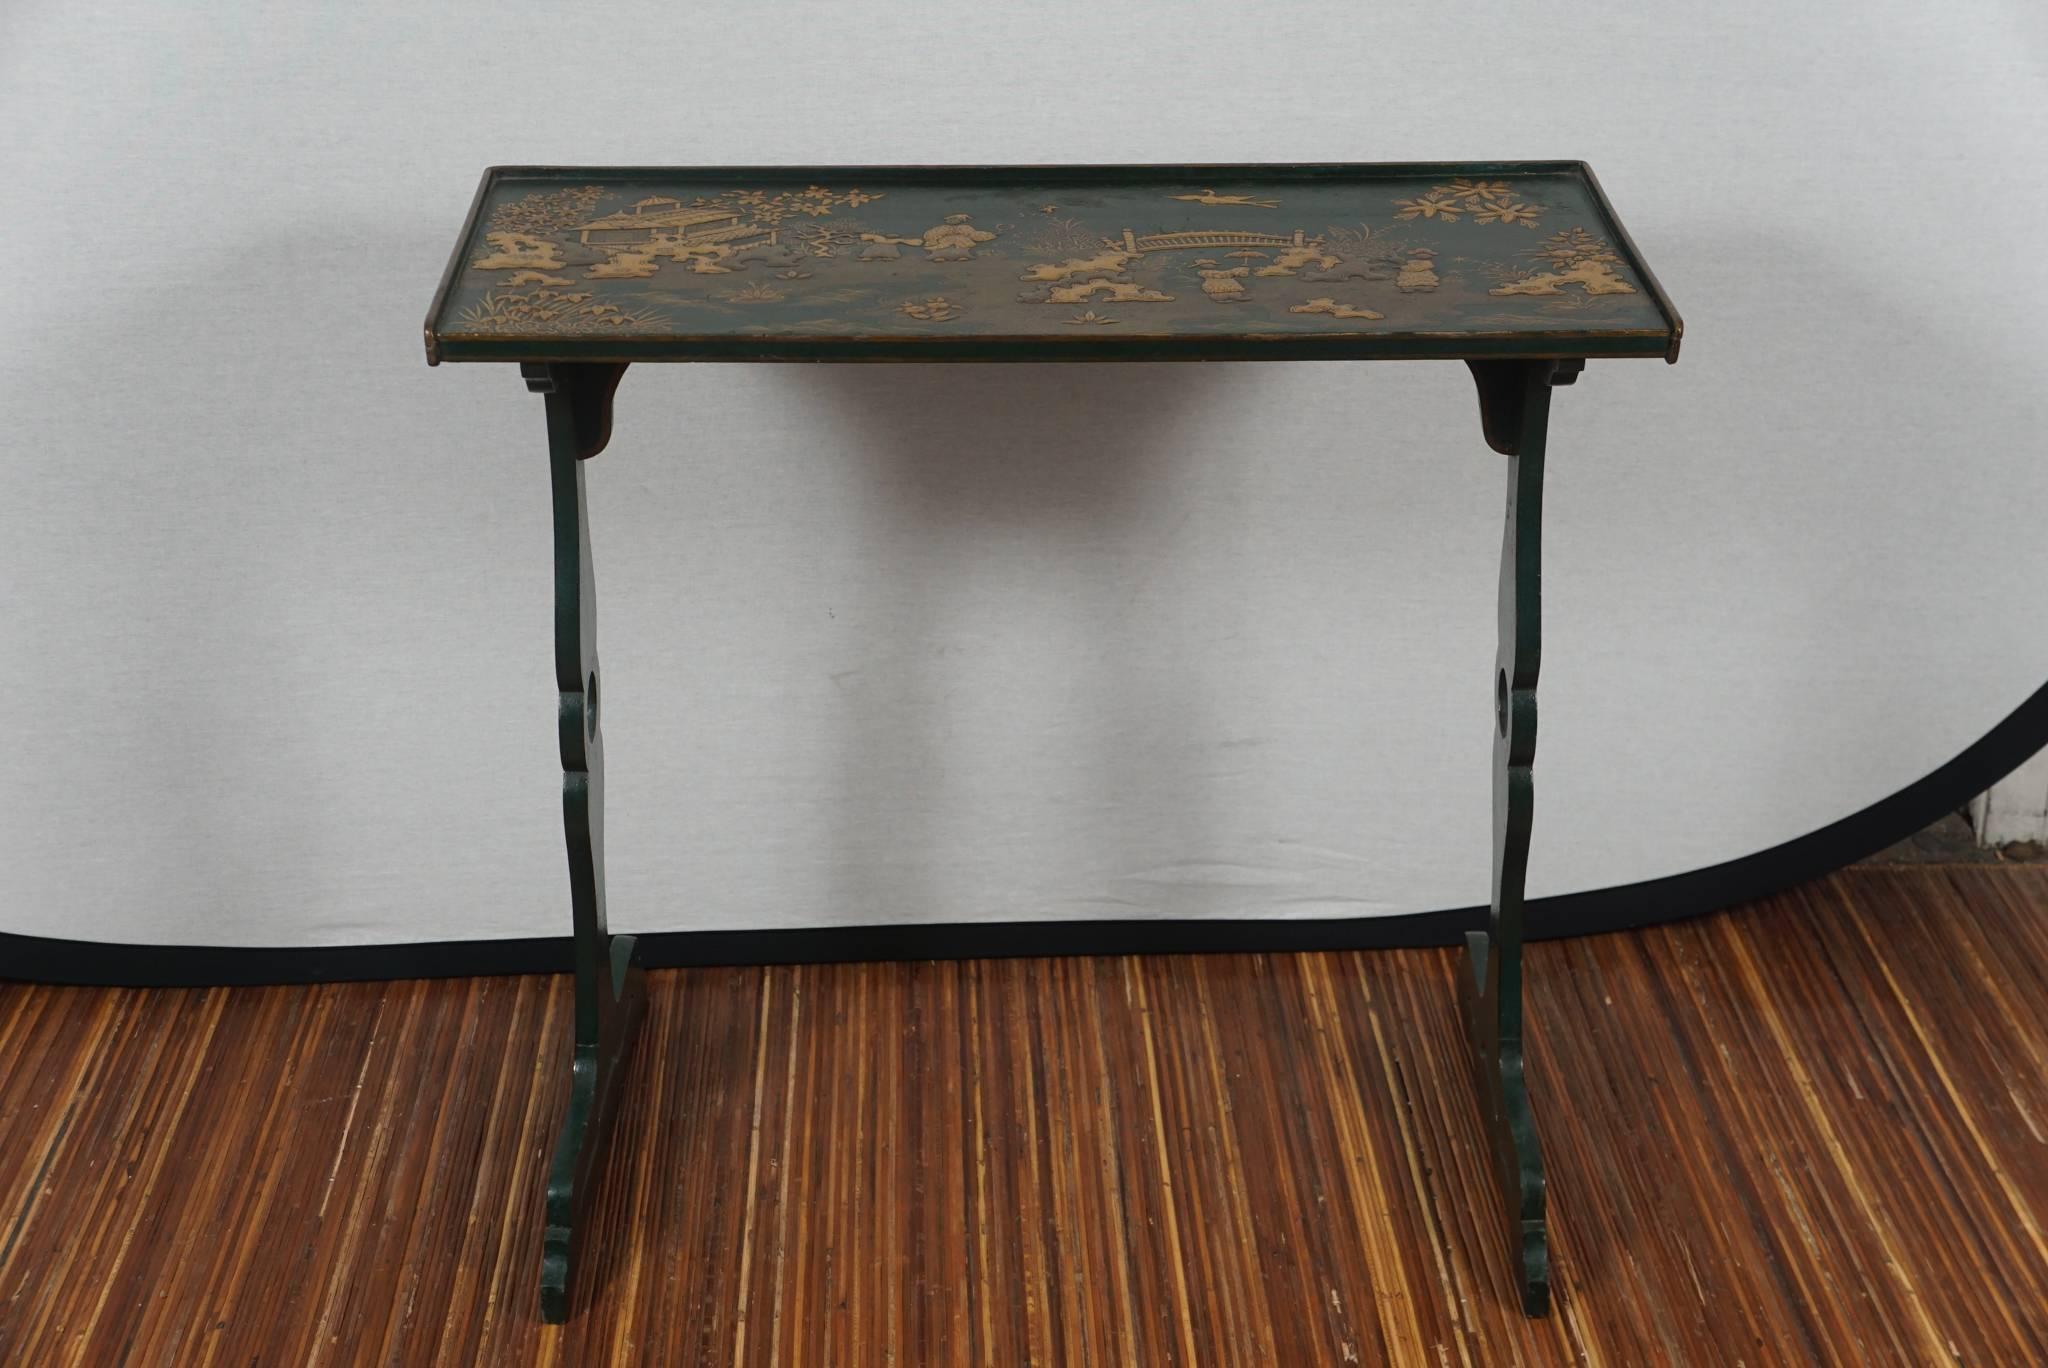 This lovely fine old table was made in England, circa 1900 during the Edwardian era. Decorated with japanned scenes of court ladies and gentlemen in a luscious oriental landscape with buildings and trees the color ground is a deep green blue with